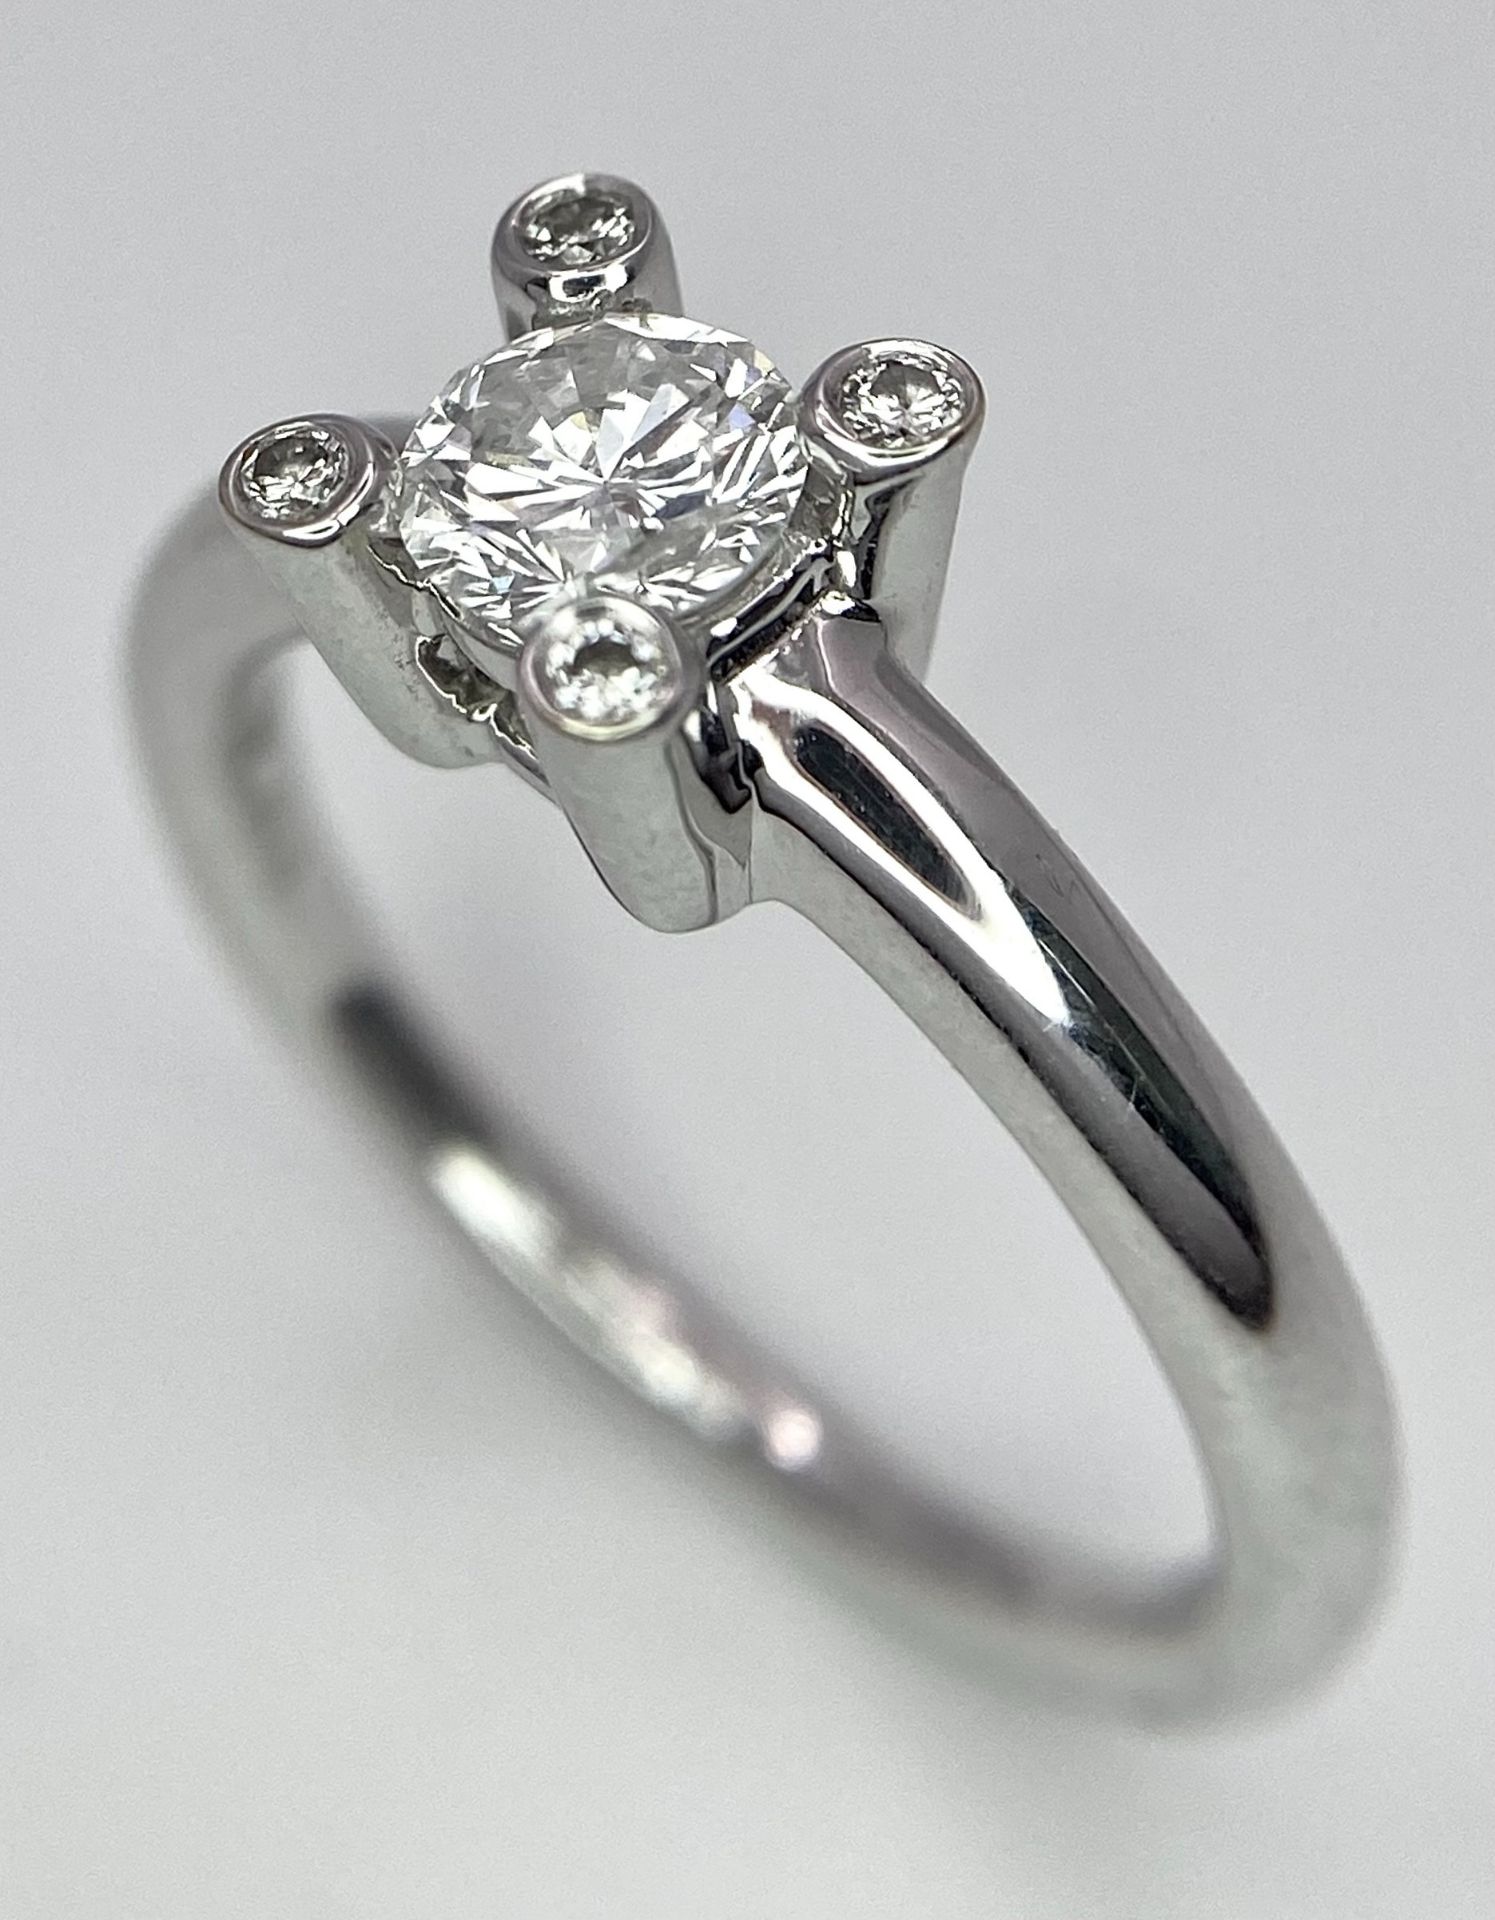 AN 18K WHITE GOLD DIAMOND SOLITAIRE RING WITH FOUR DIAMOND TURRETS - 0.50CT 4.6G. SIZE M 1/2. - Image 6 of 10